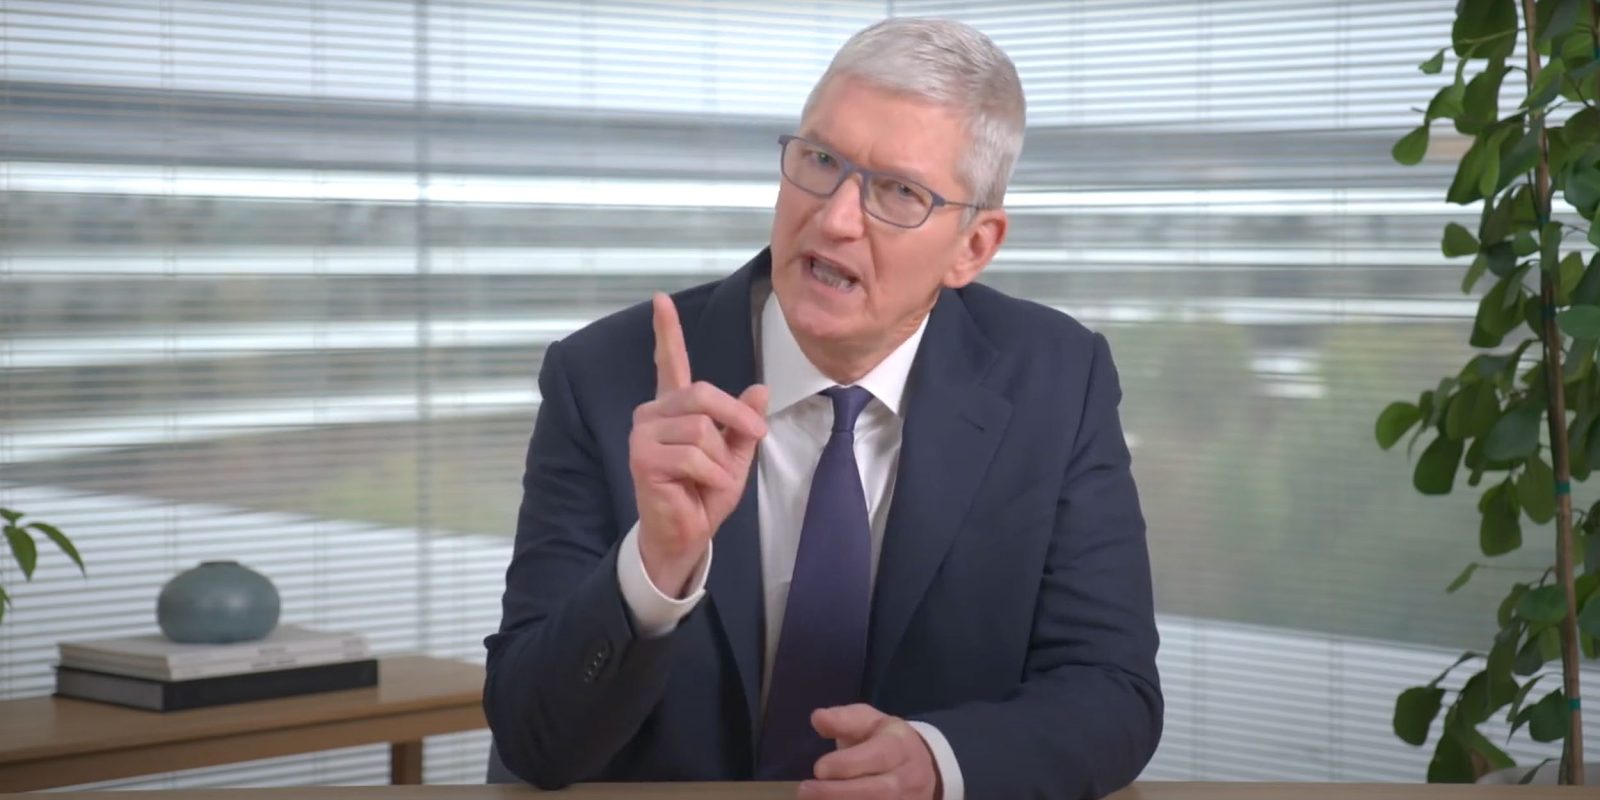 Tim Cook in new interview: ‘I’m really not sure the average person can tell you what the metaverse is’